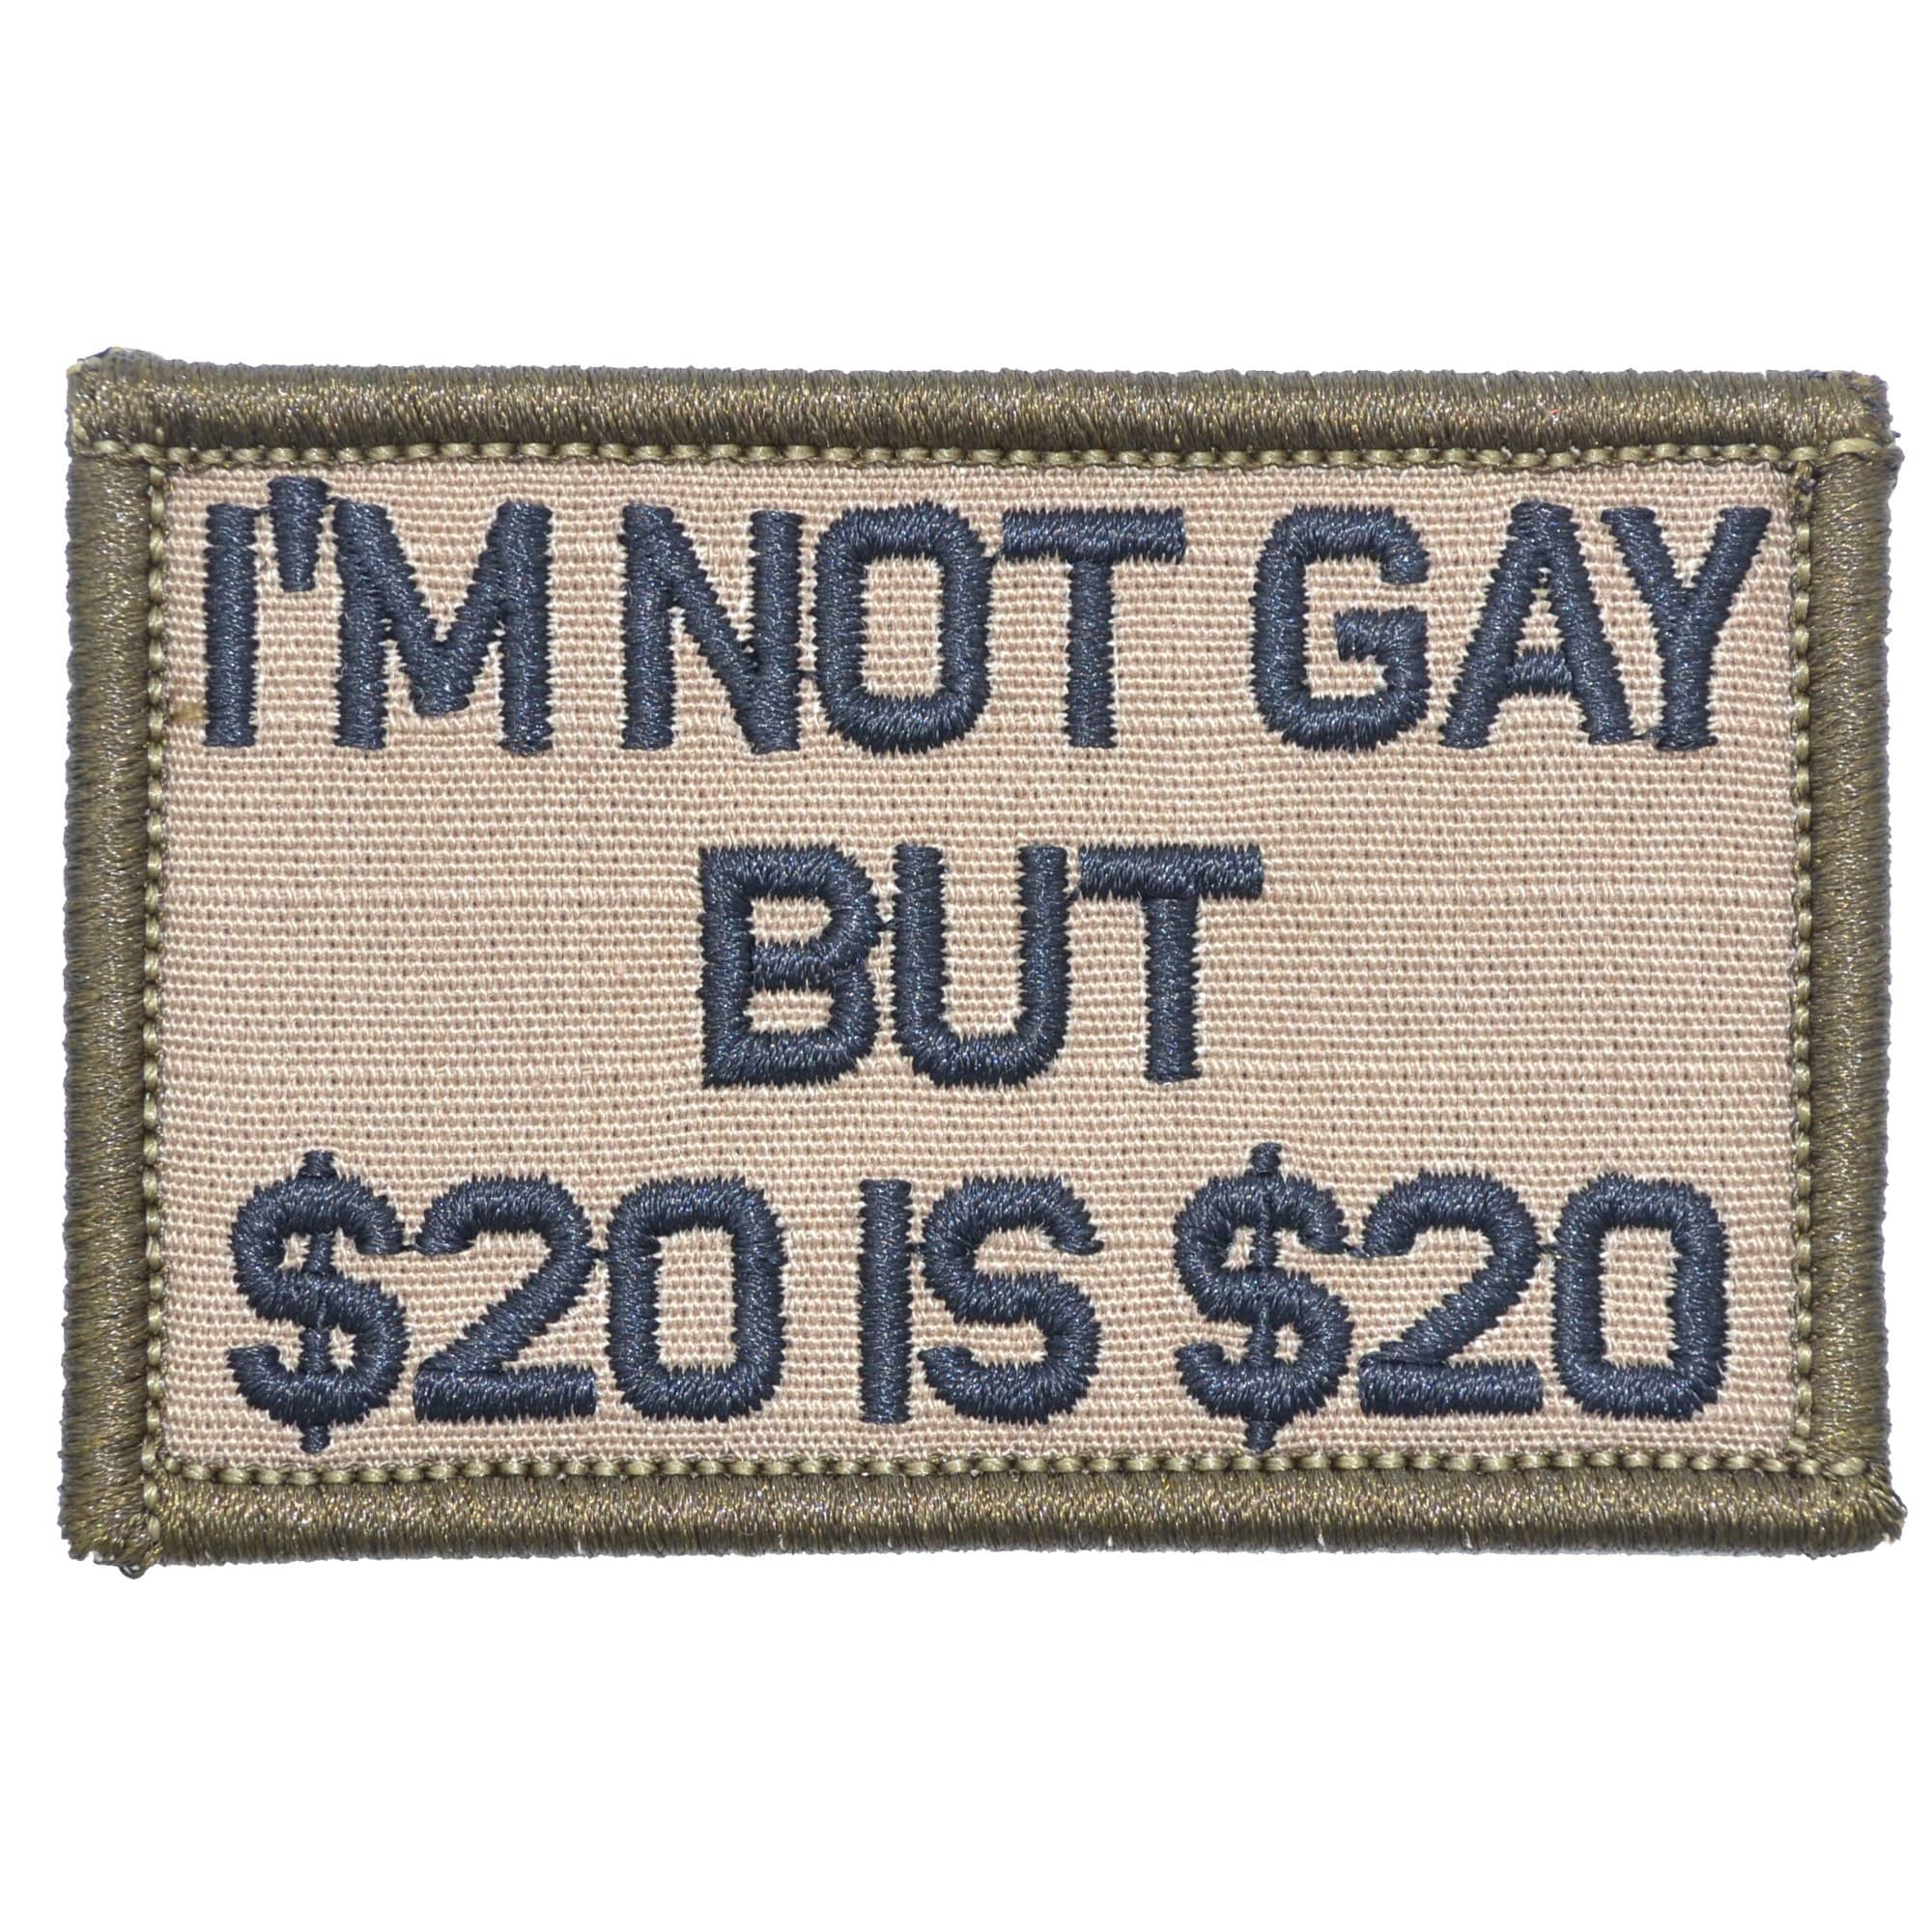 Tactical Gear Junkie Patches Coyote Brown w/ Black I'm Not Gay But $20 is $20 - 2x3 Patch